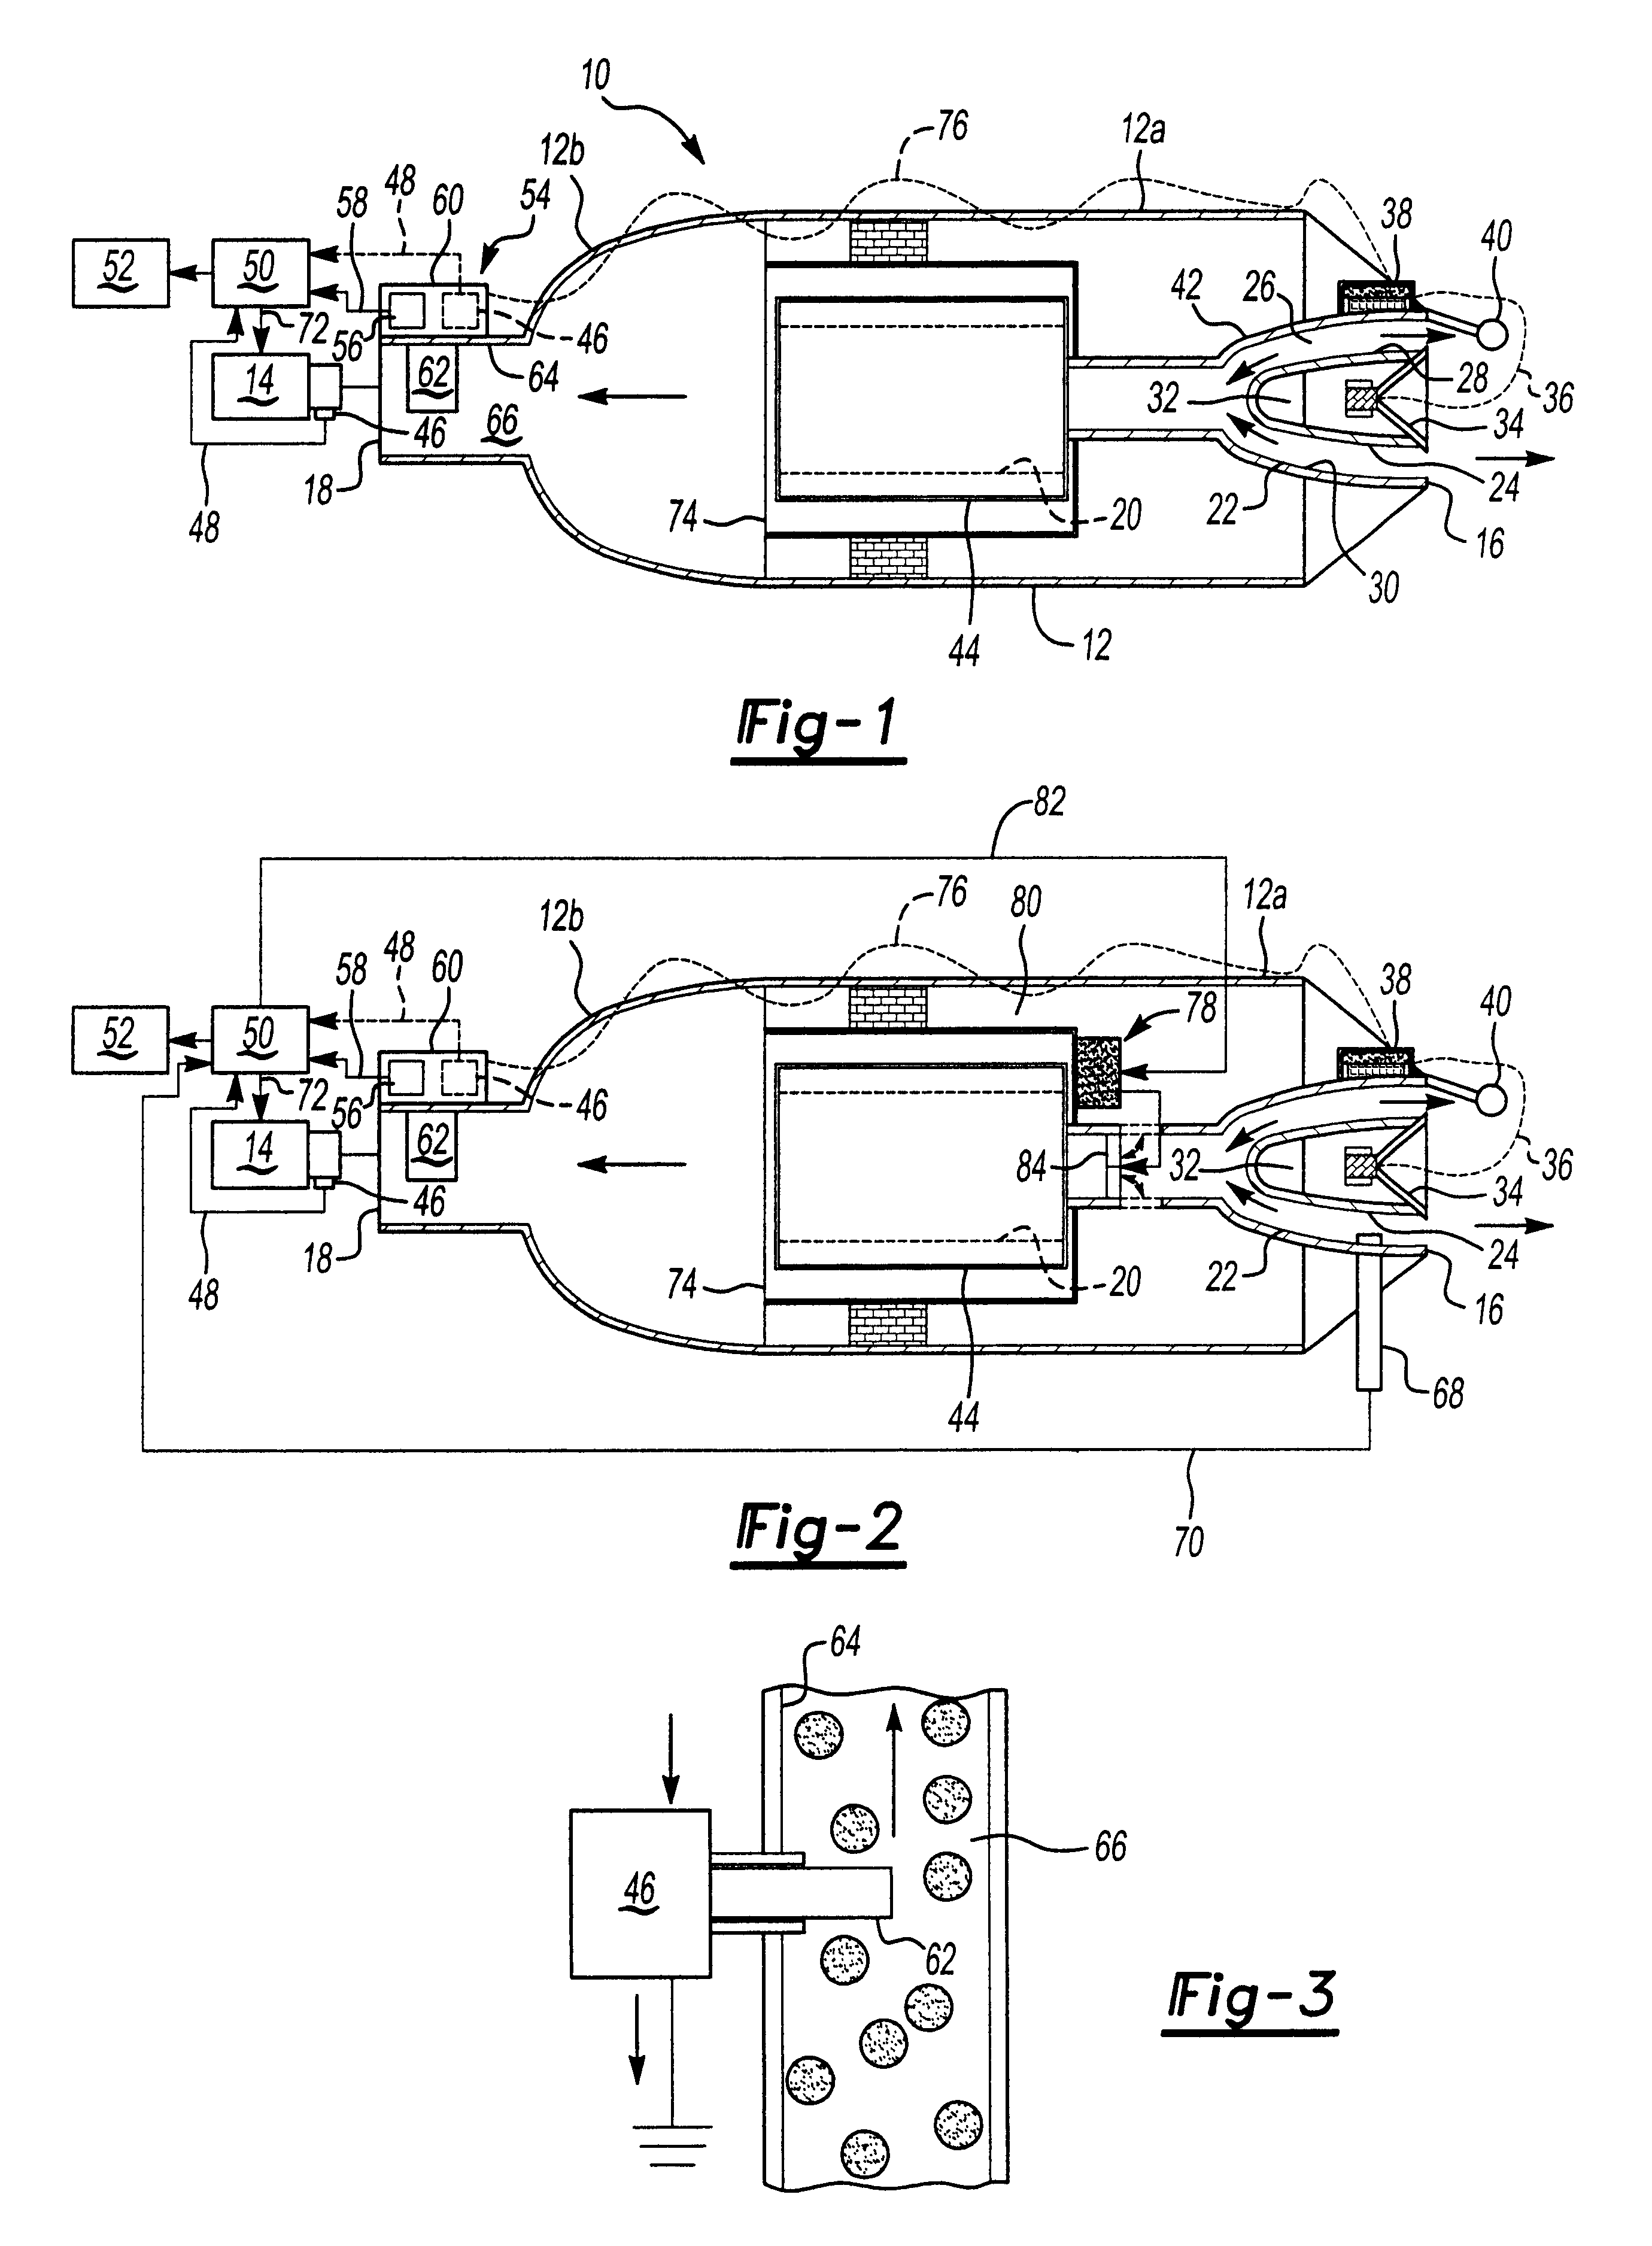 Dust sensing assembly air intake system